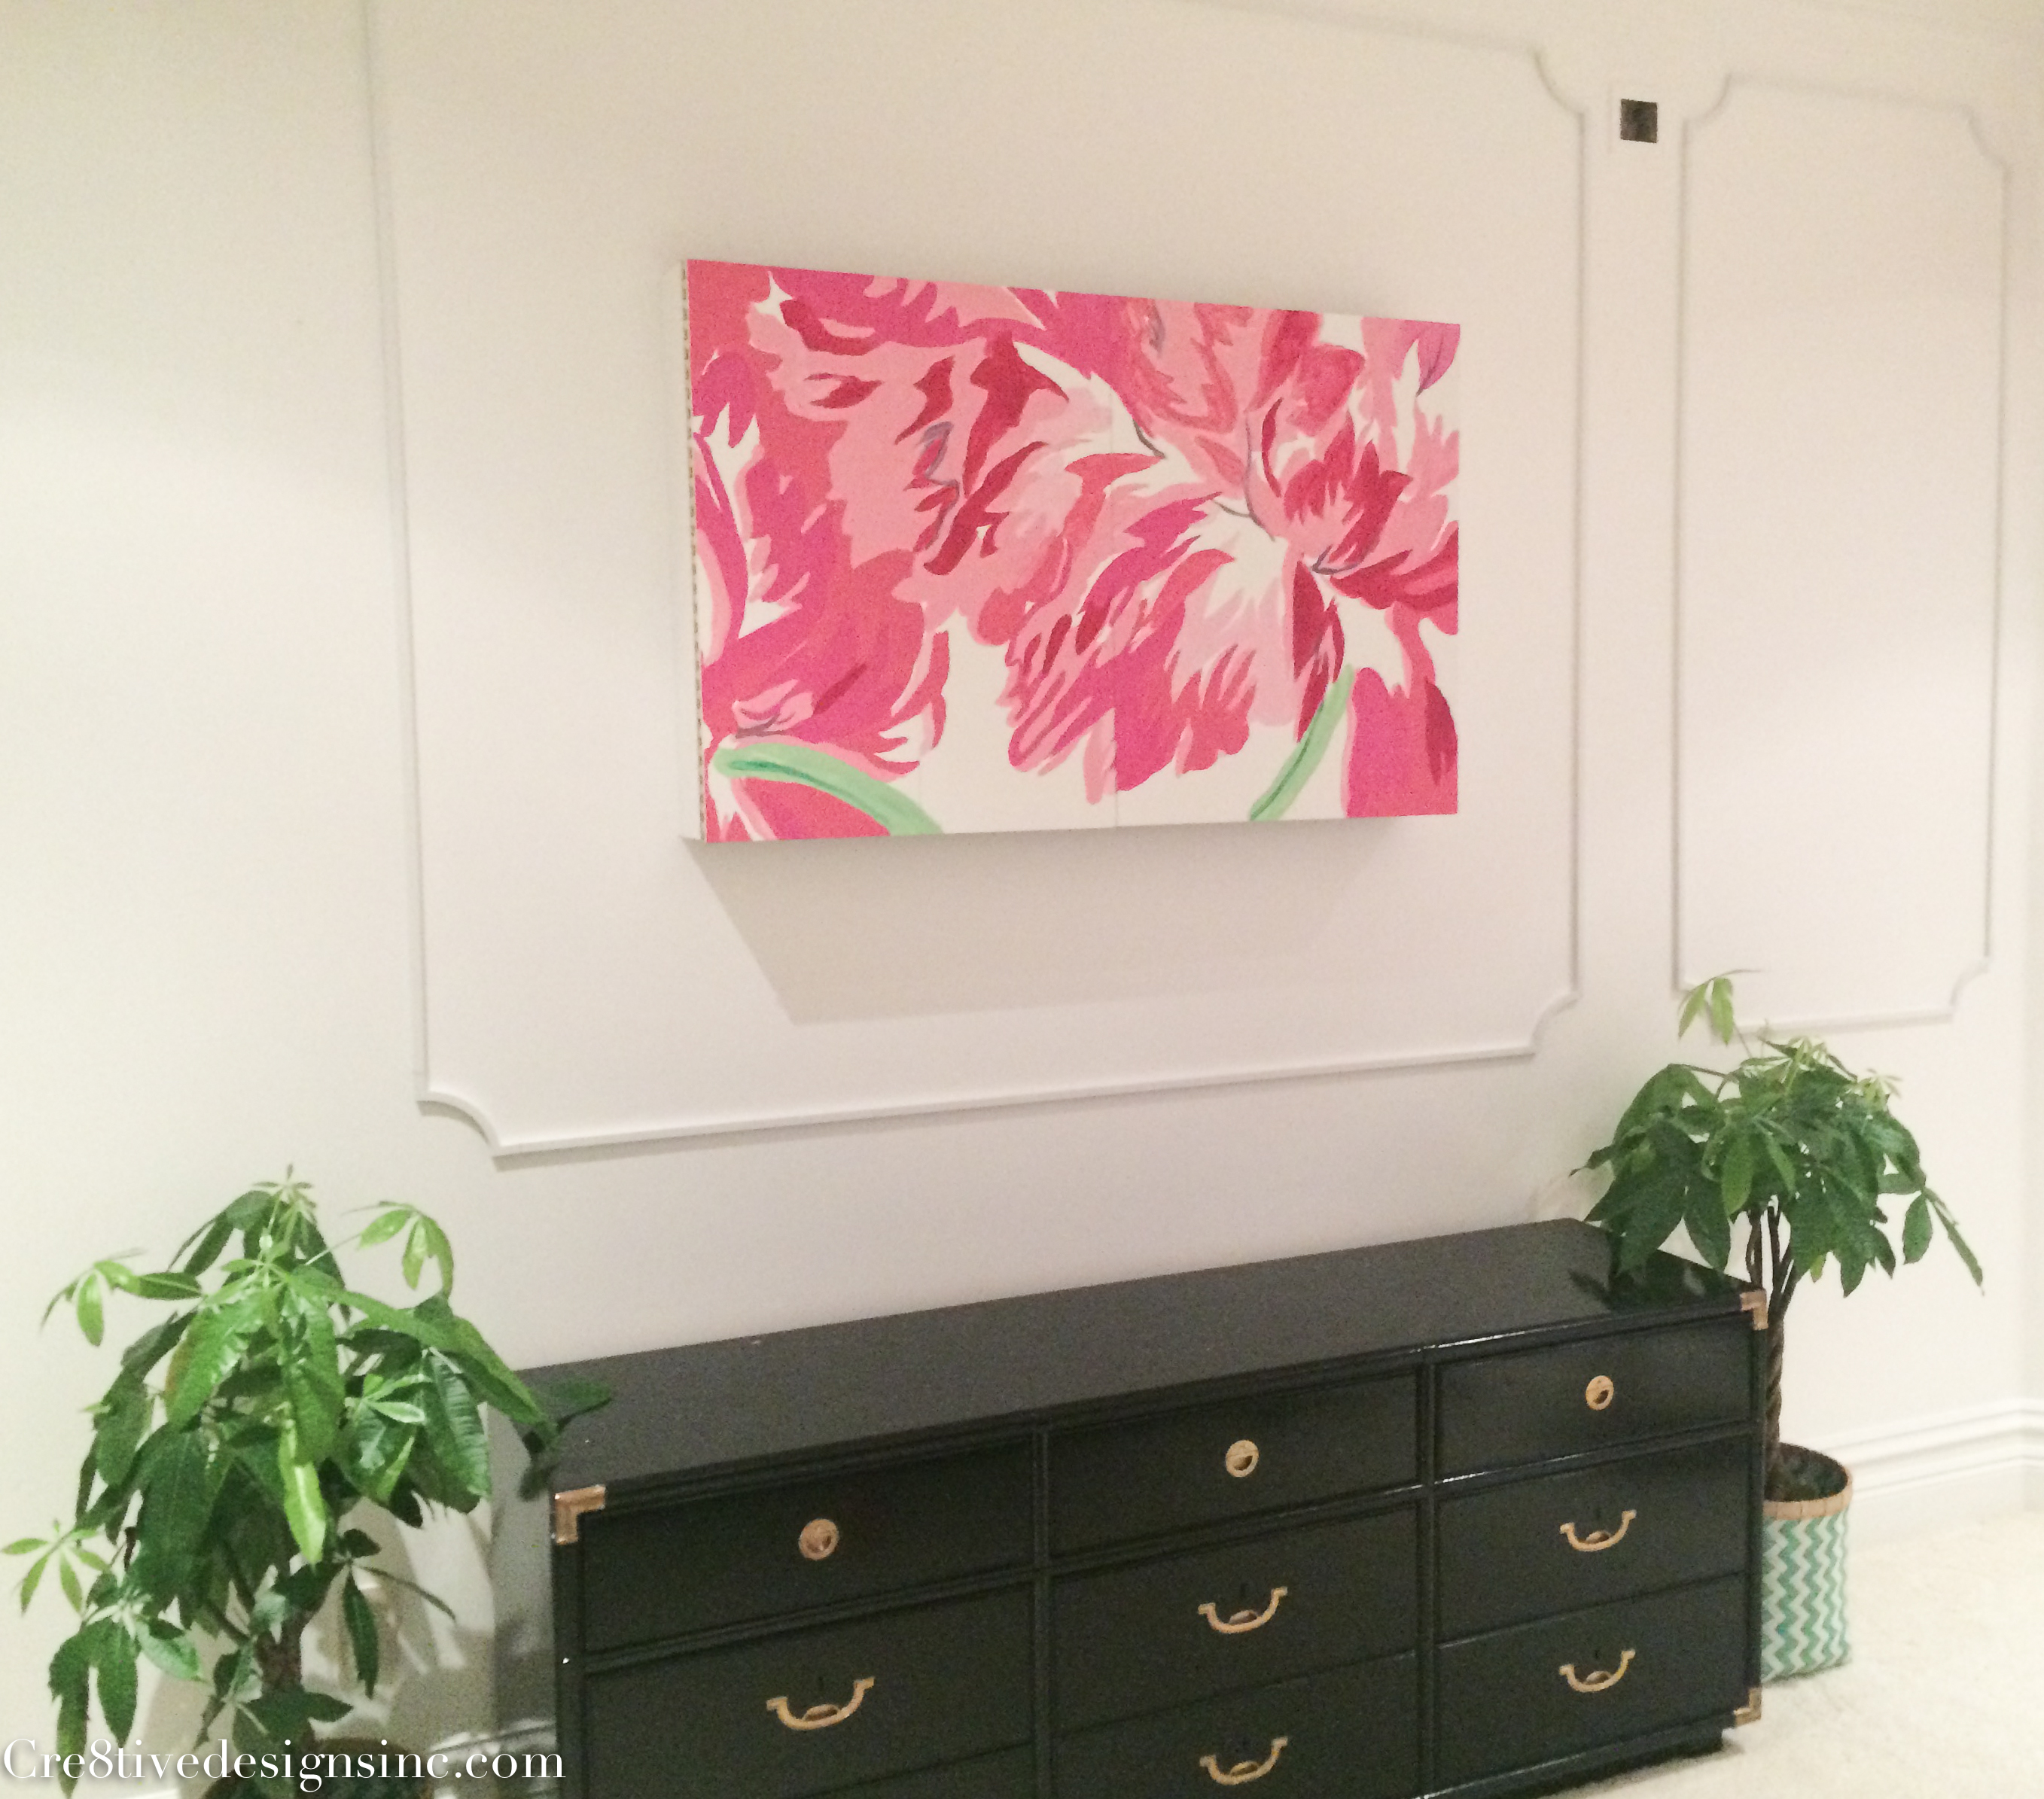 How To Hide A Flat Screen Tv With Artwork Cre8tive Designs Inc